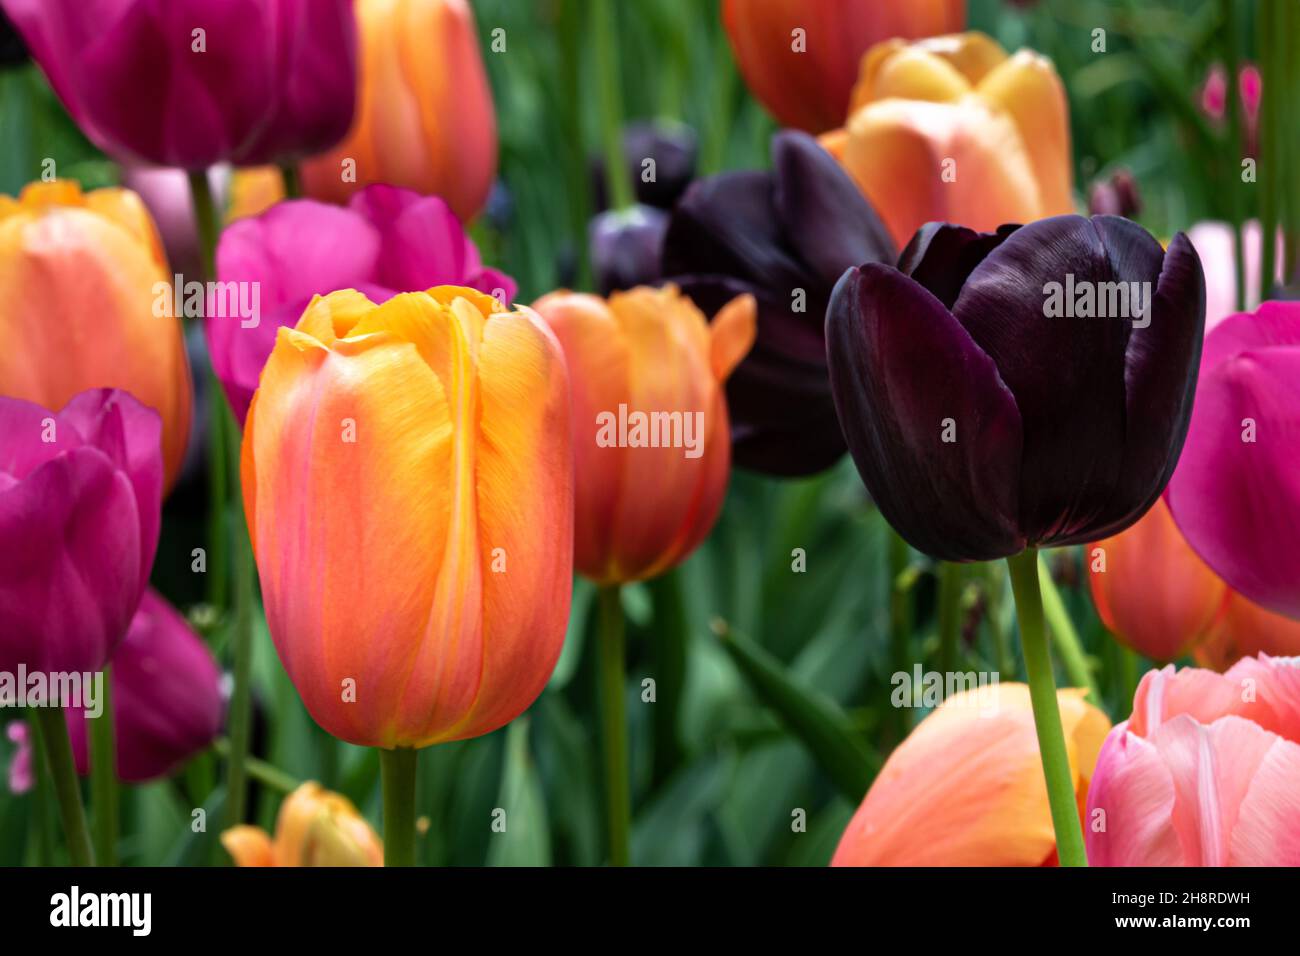 Closeup of tulips, wide variety of colors. Green plants in background. Missouri Botanical Garden, St. Louis, Missouri. Stock Photo